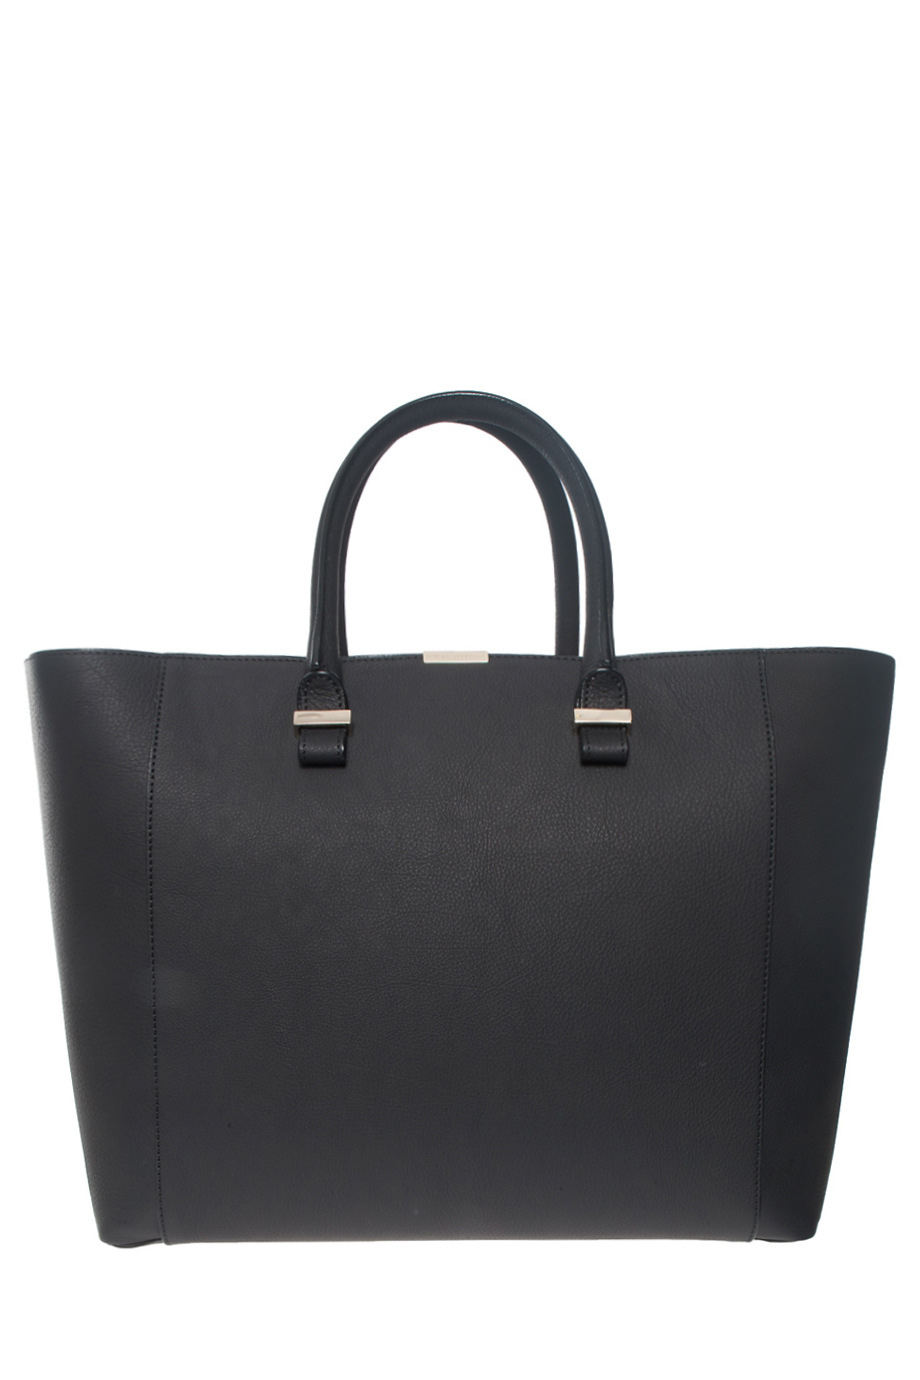 Victoria Beckham Leather Liberty Tote Bag in Black - Lyst